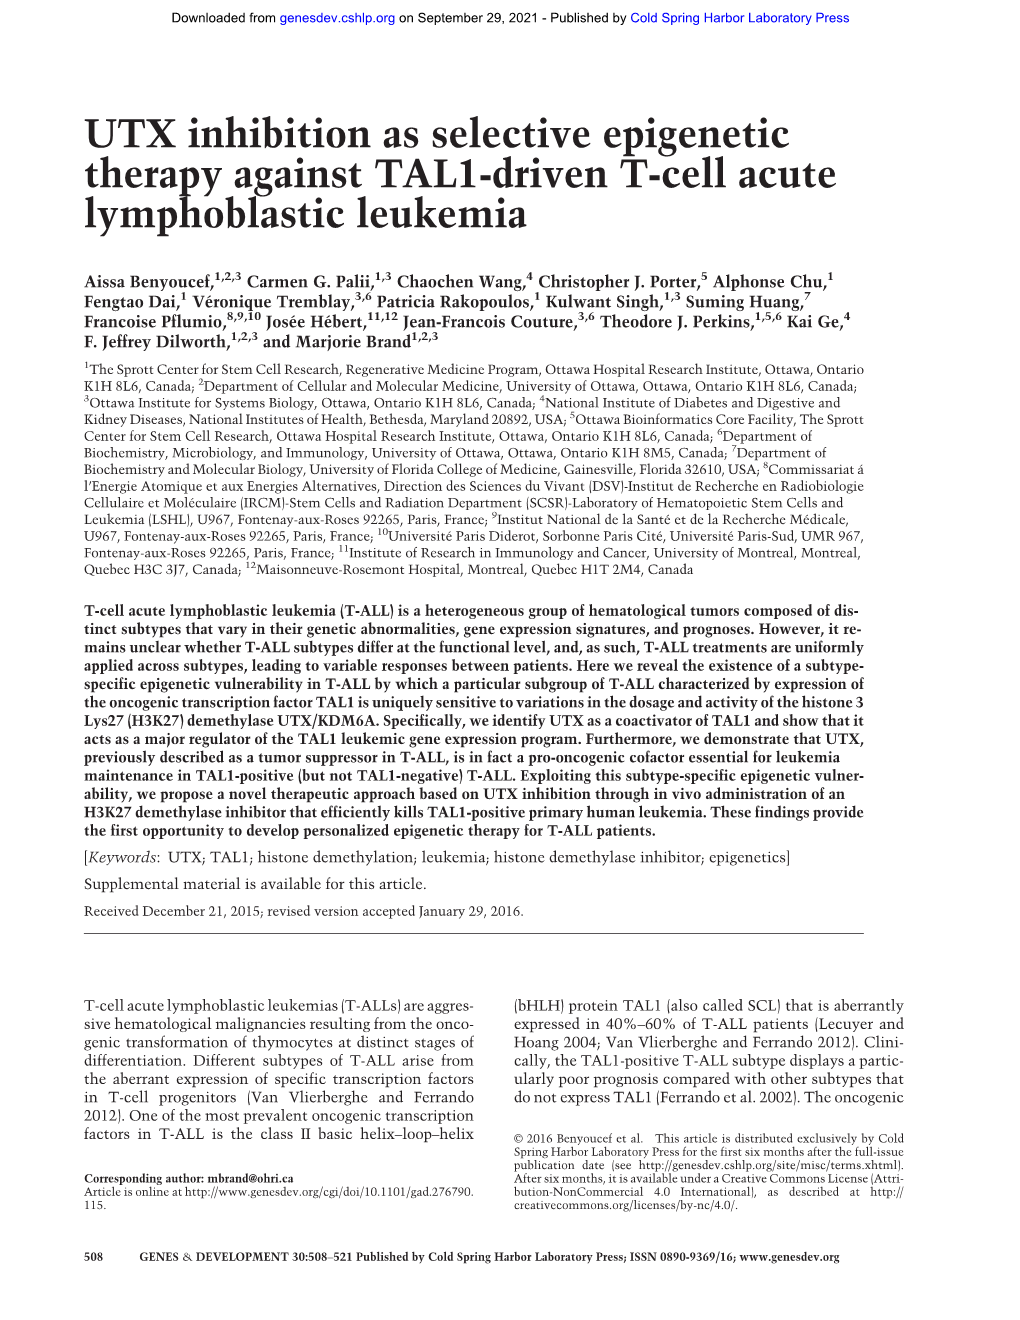 UTX Inhibition As Selective Epigenetic Therapy Against TAL1-Driven T-Cell Acute Lymphoblastic Leukemia